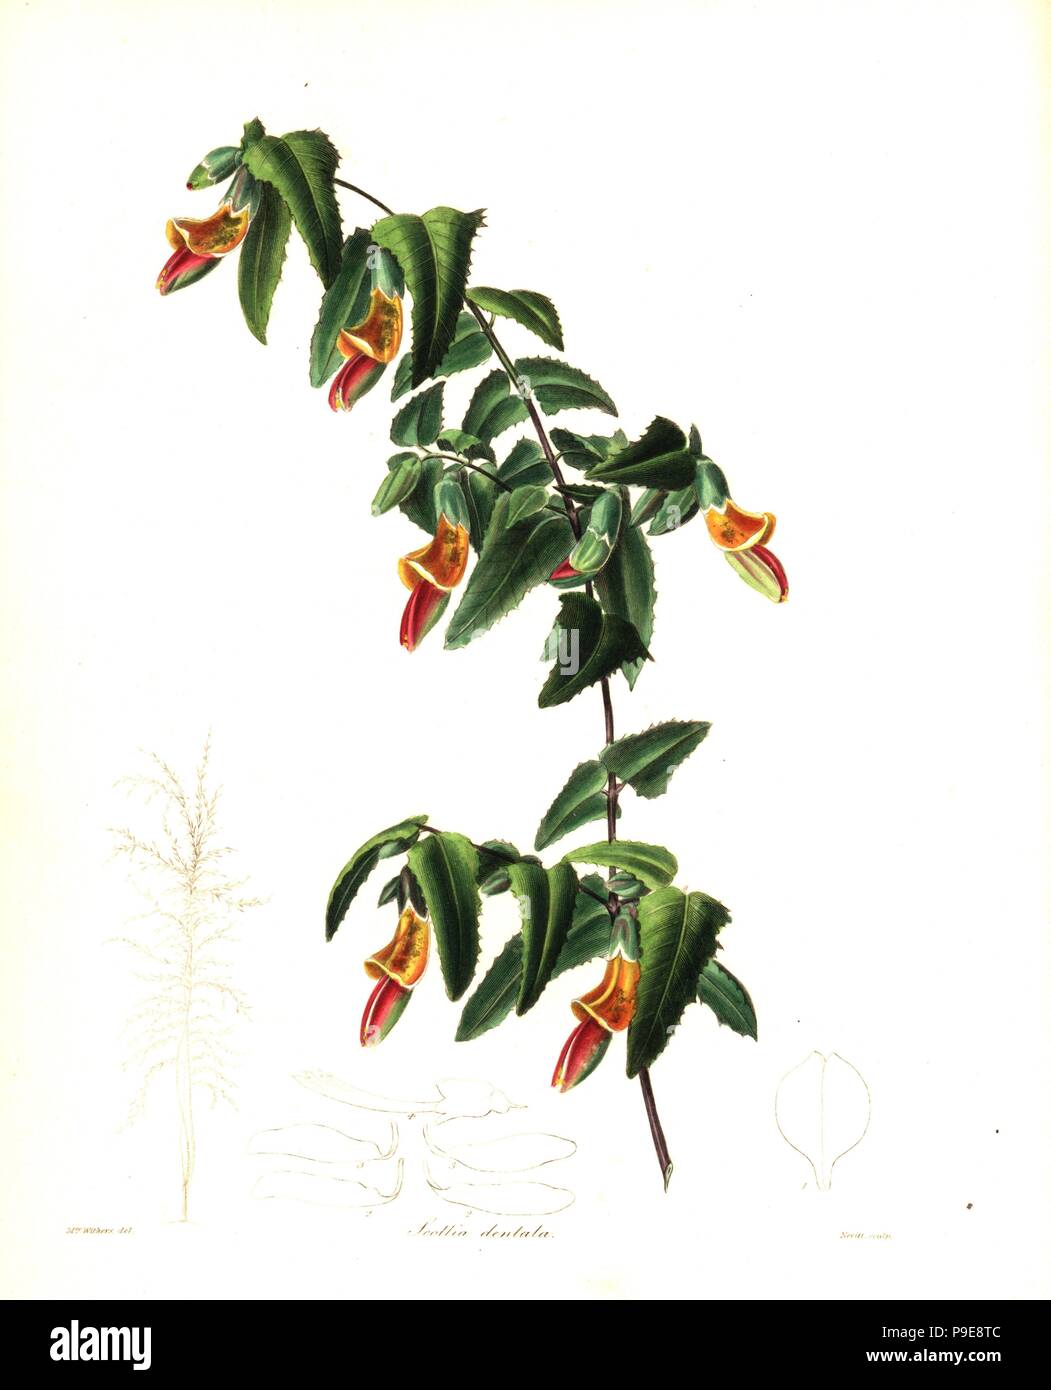 Bossiaea dentata (Broad-leaved scottia, Scottia dentata). Handcoloured copperplate engraving by S. Nevitt after a botanical illustration by Mrs Augusta Withers from Benjamin Maund and the Rev. John Stevens Henslow's The Botanist, London, 1836. Stock Photo